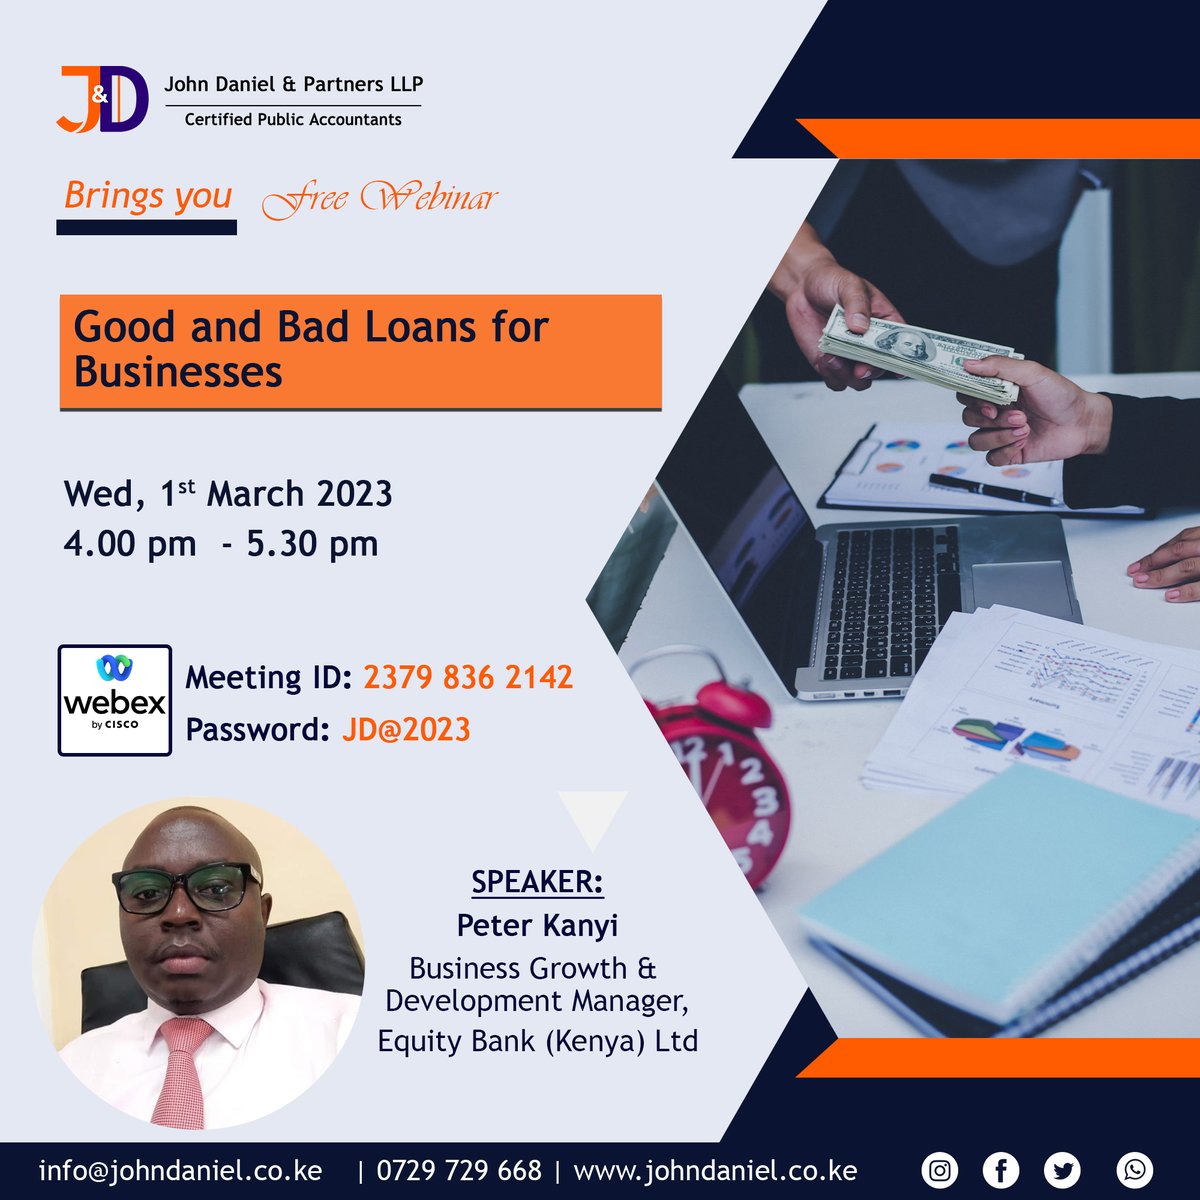 It's happening this evening at 4.30 pm.
Here is the link to the meeting. You're welcome to share it with others.
See you then!

johndanielpartners.webex.com/johndanielpart… 

#capital #loans  #businesscapital
#March1st #wednesdayconversation